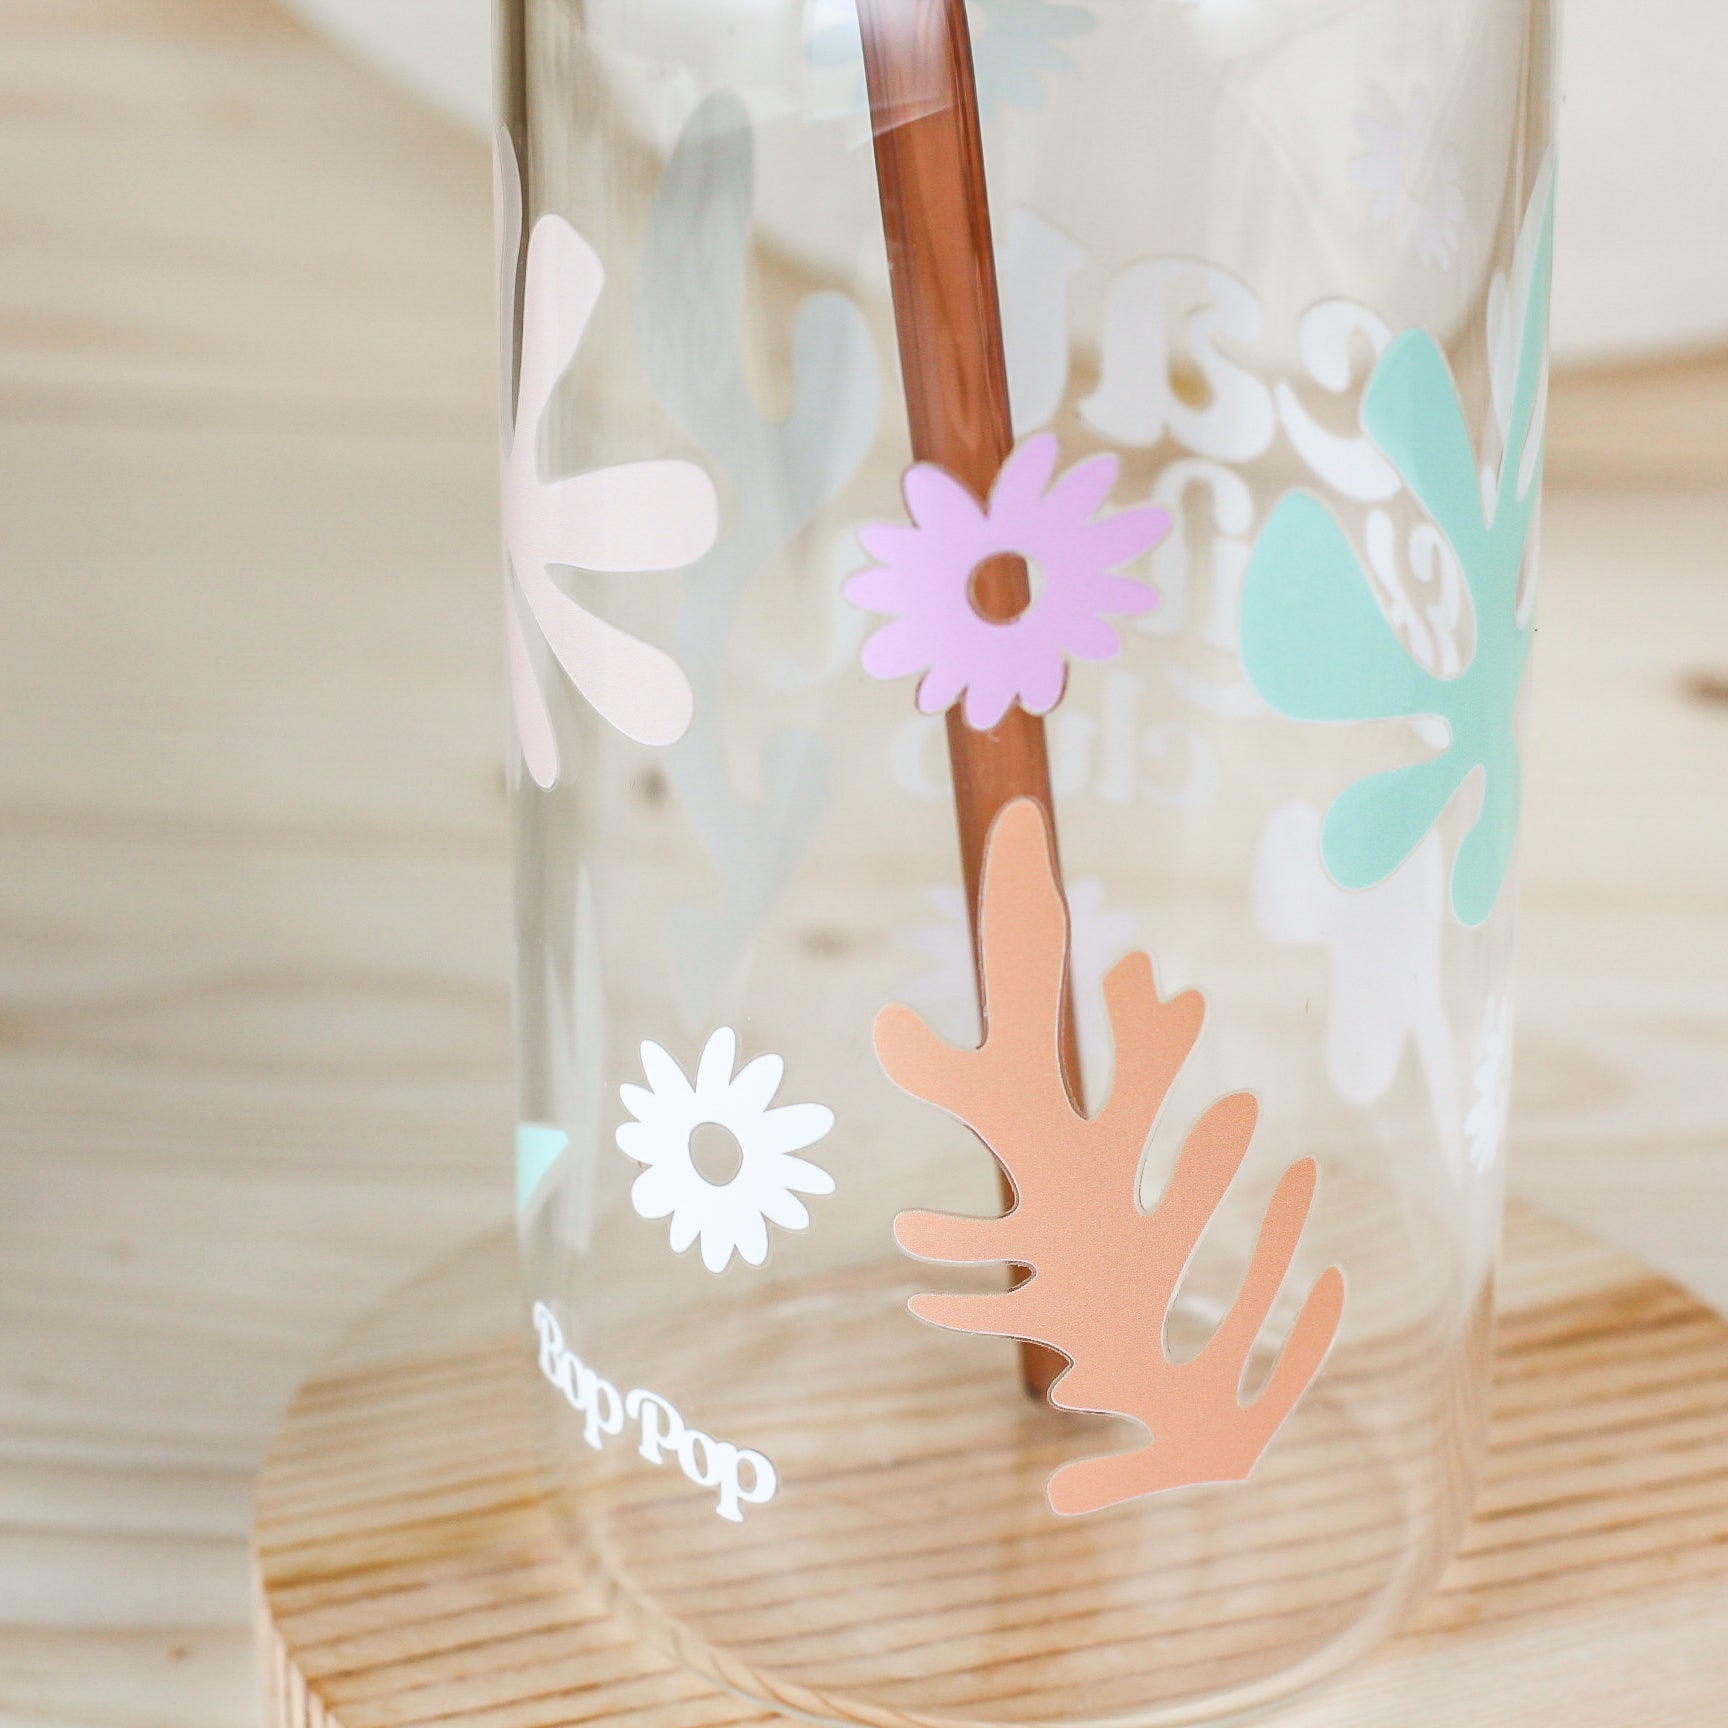 Cat Kitten Club mom dad Life Beer Glass with UV DTF transfers  Bamboo Lid  Colored Glass Straw Flower Daisy Pet Theme cups